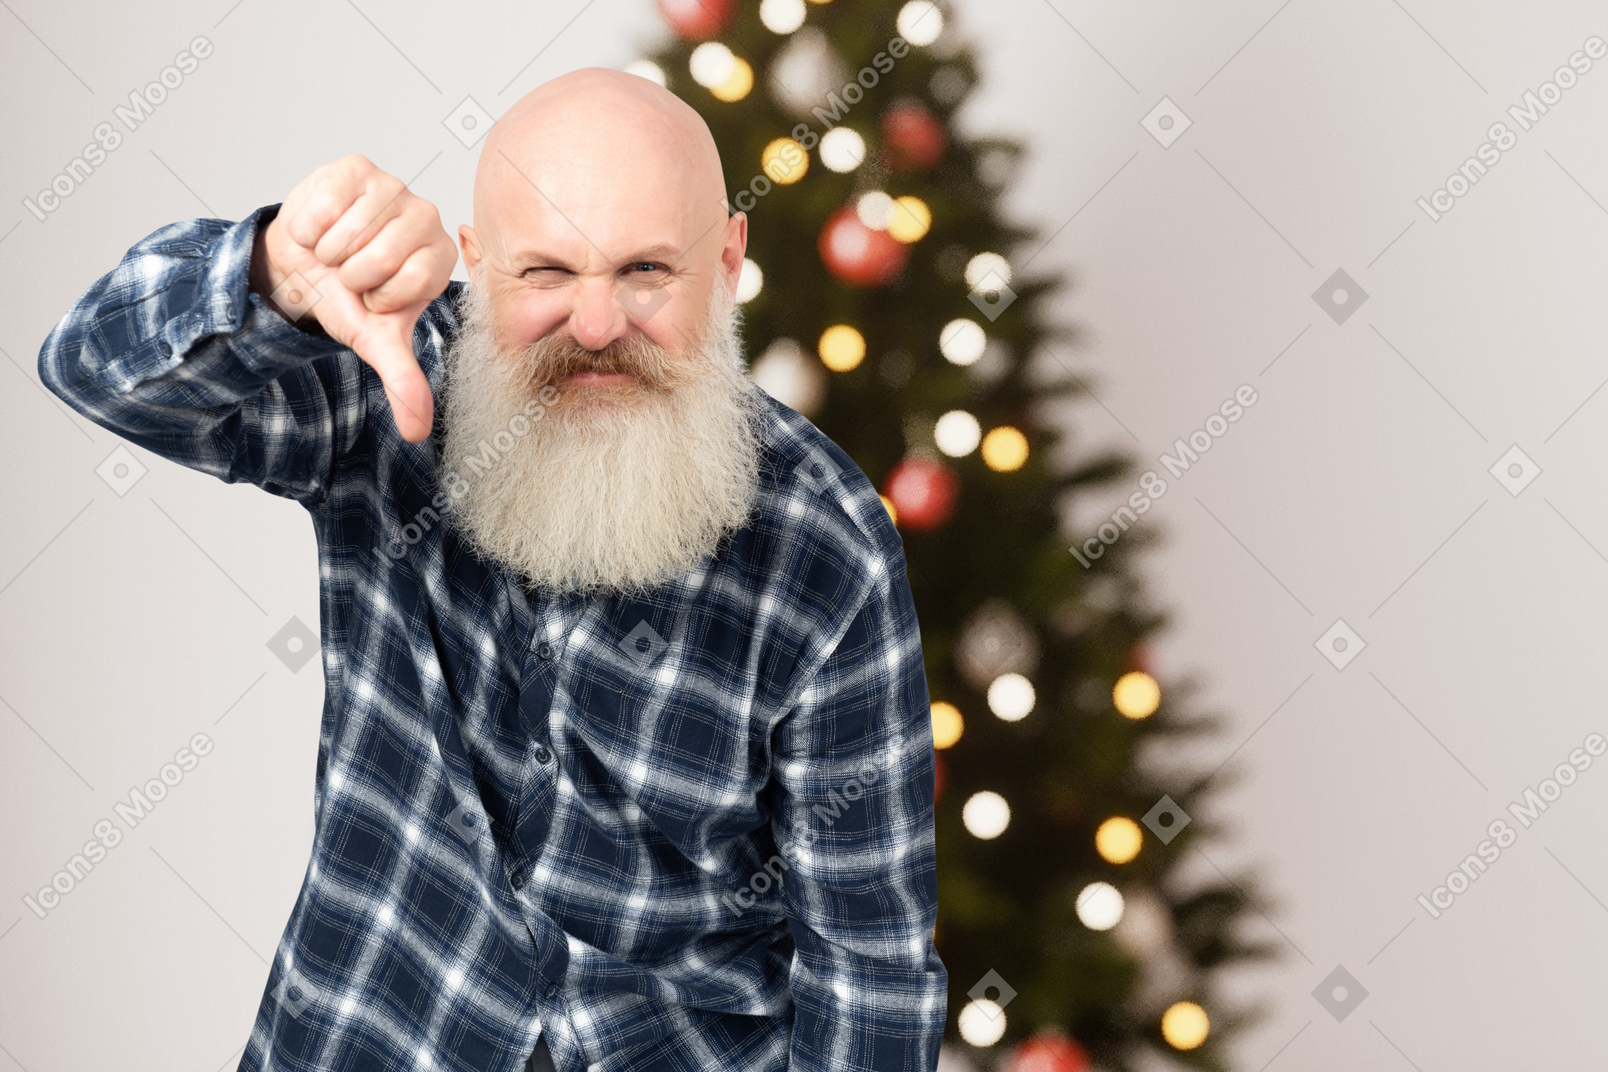 Old man doesn't like christmas